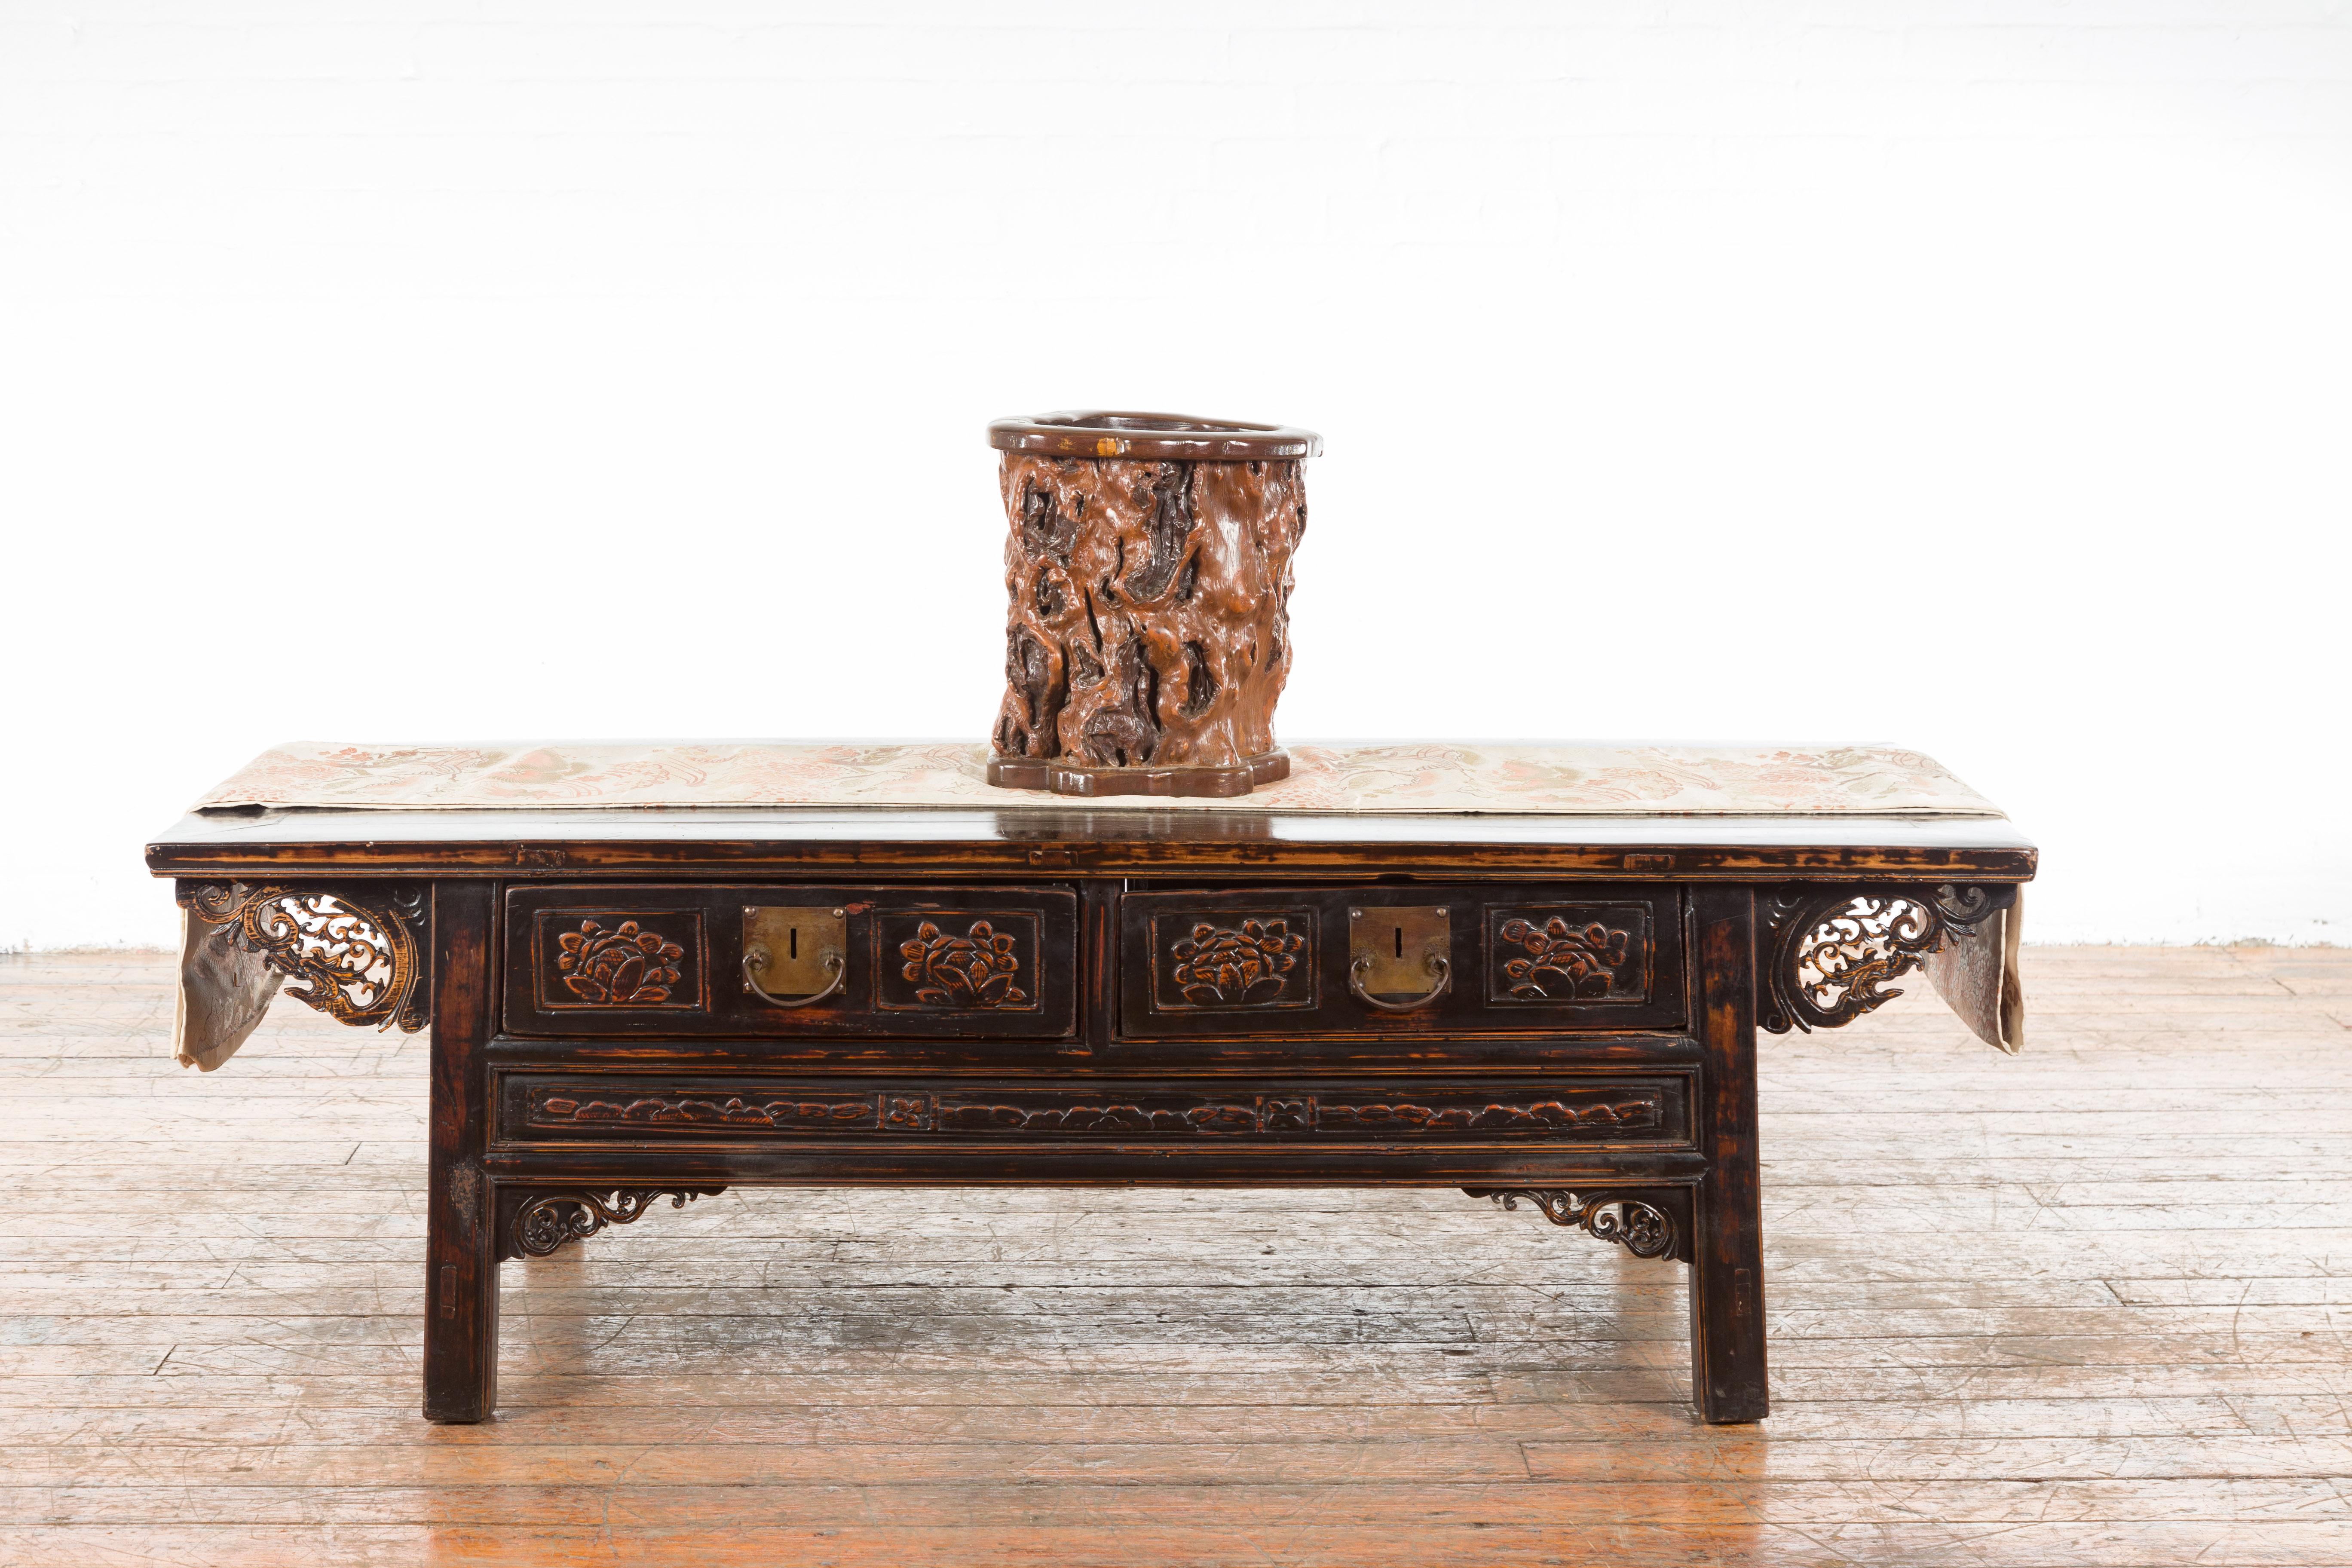 A Chinese vintage root planter from the mid 20th century, with dark brown patina. Created in China during the midcentury period, this root planter charms us with its rustic flair and dark patina. A great addition to any home, placed indoors or under